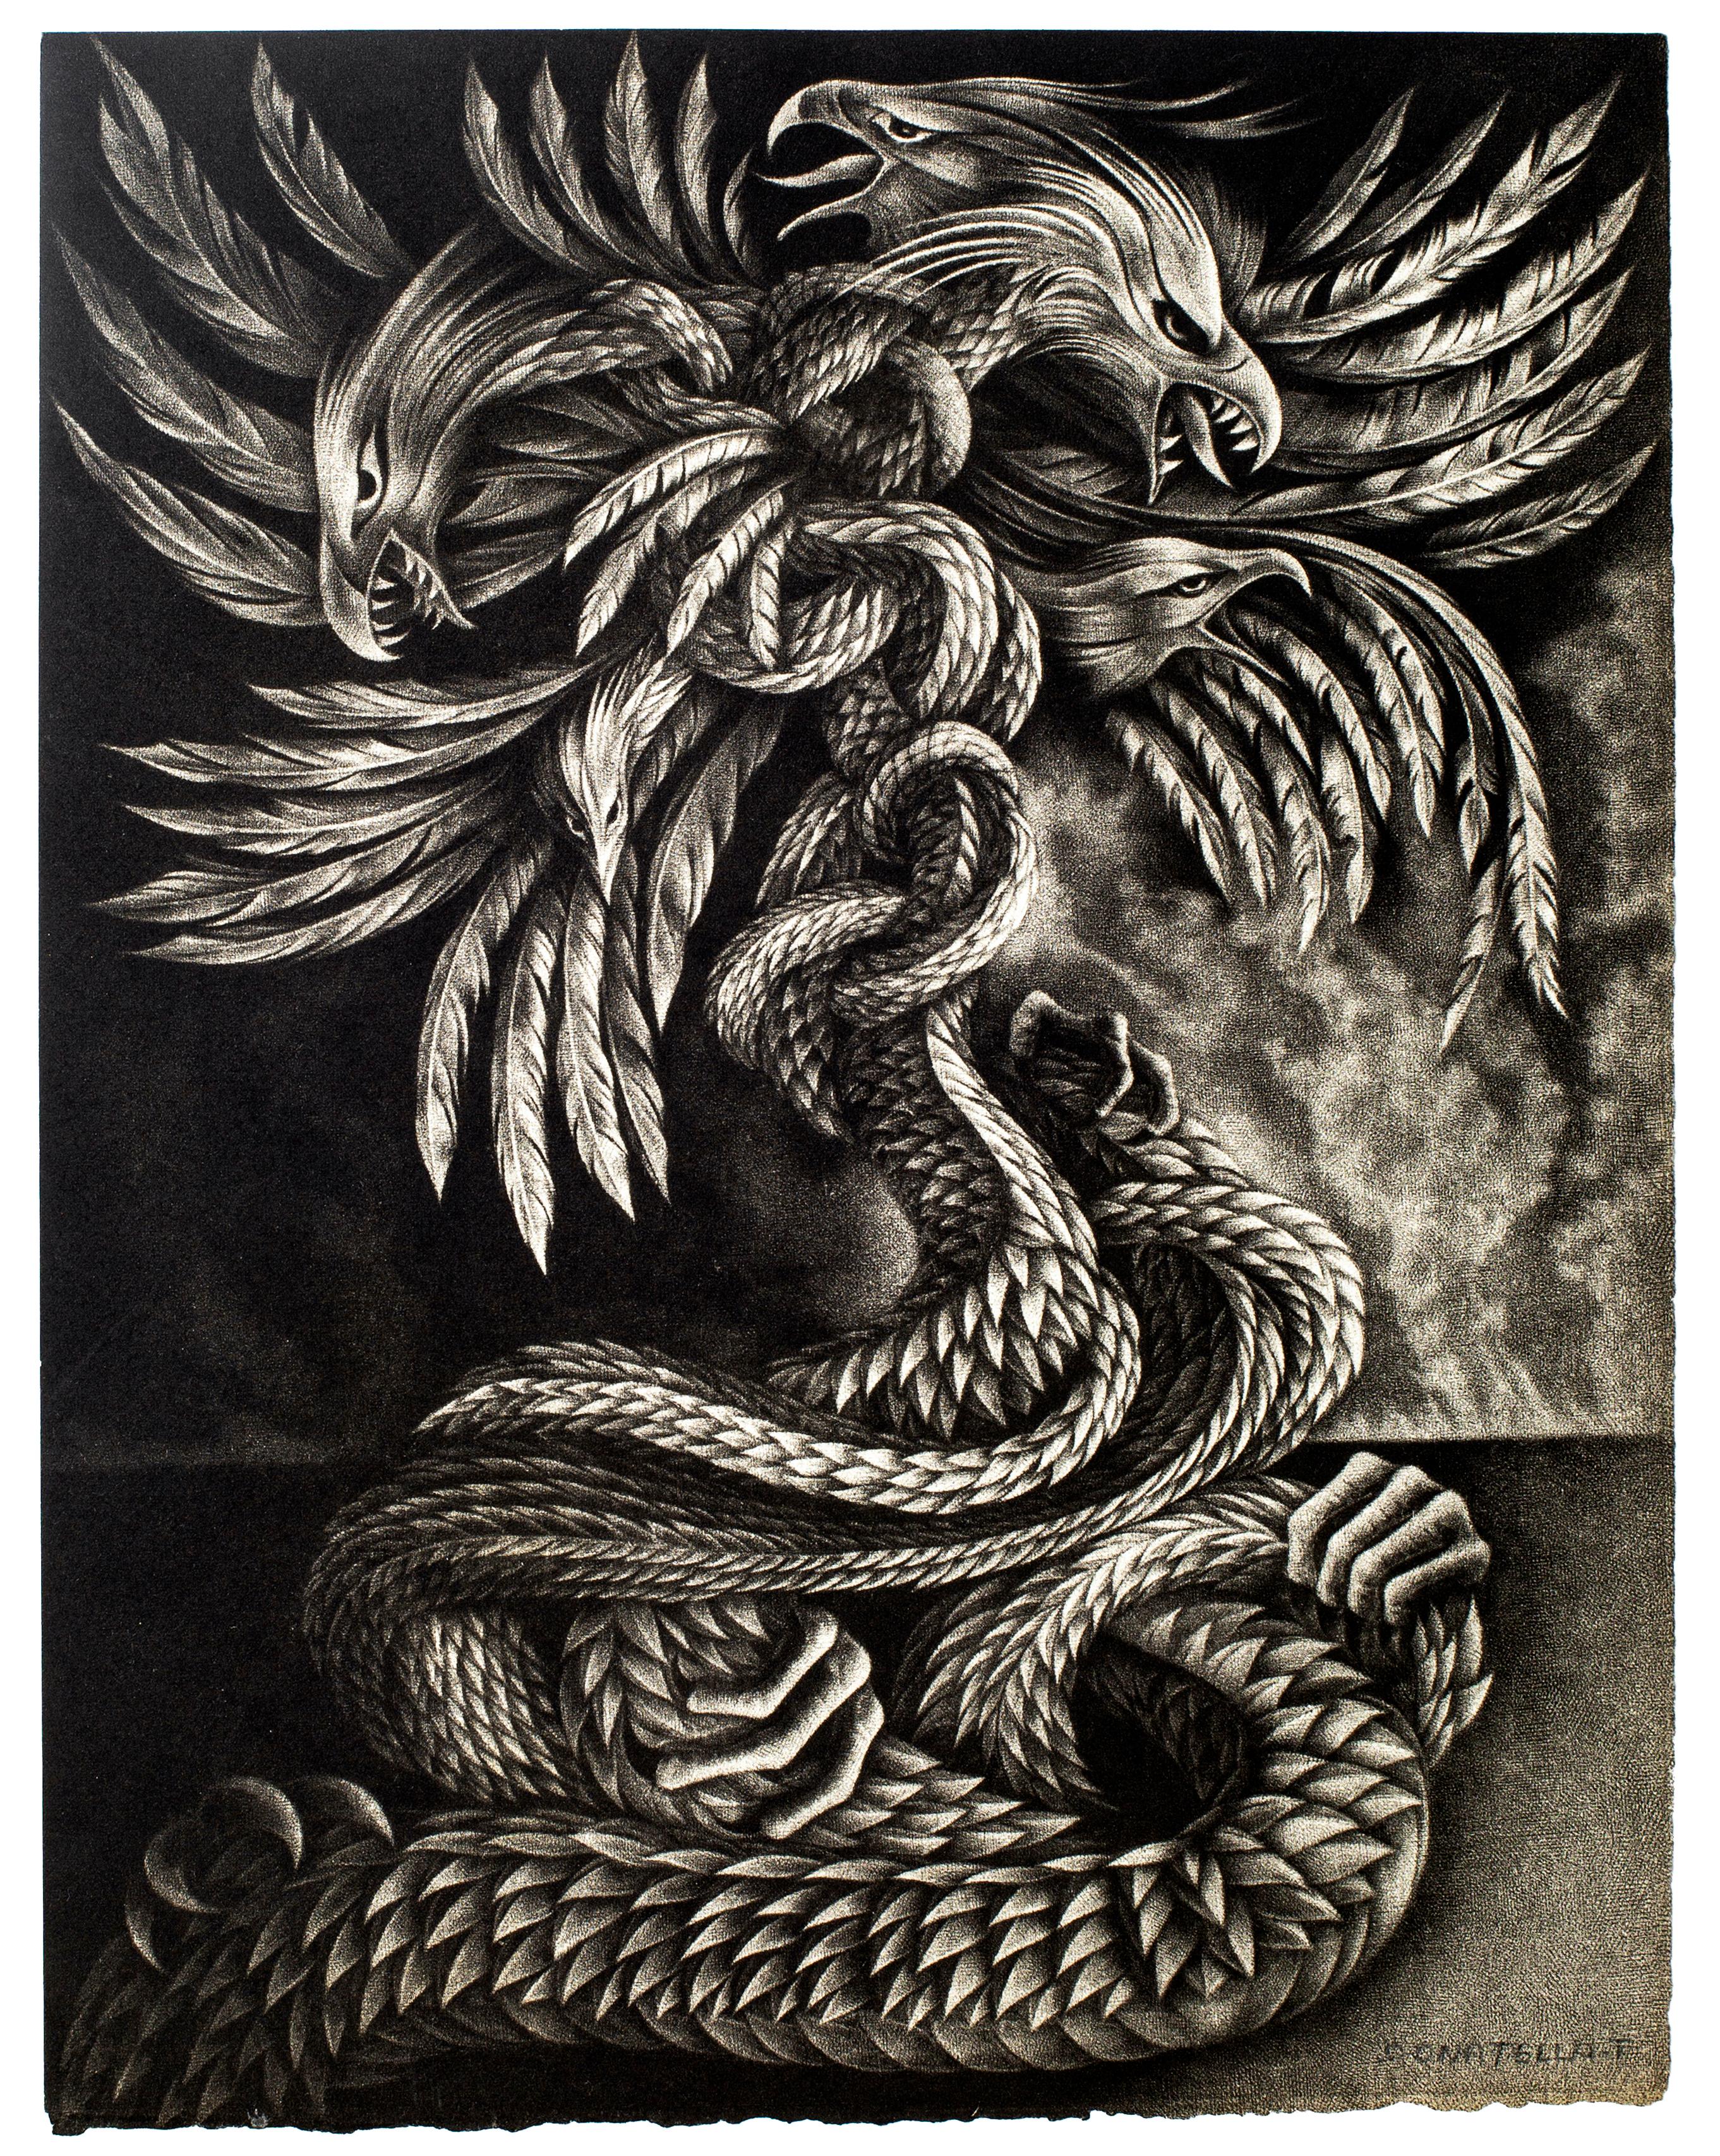 Donatella Theze Figurative Print - Hydra -Lithograph by D. These - Late 20th Century